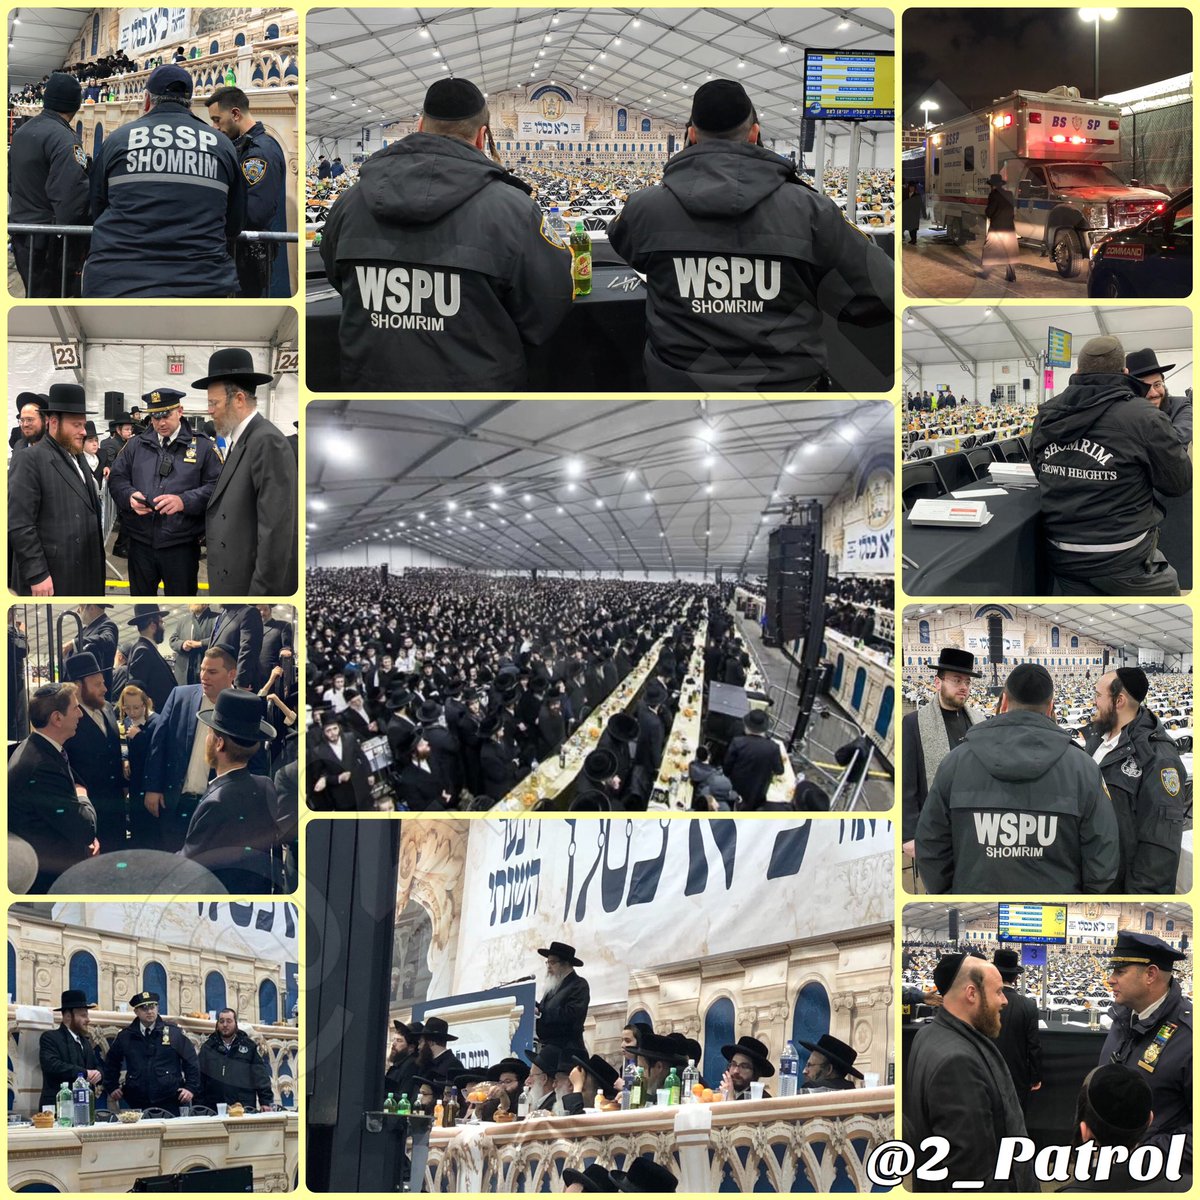 Outstanding work by the amazing #Shomrim volunteers working #HandInHand with @NYPDnews, ensuring the safety + #CrownControl of the 1000’s that attended the @SatmarHQ #21Kislev event last week. #UnitedShomrim #WorkingTogether #NYPDProtecting #KeepingEveryoneSafe